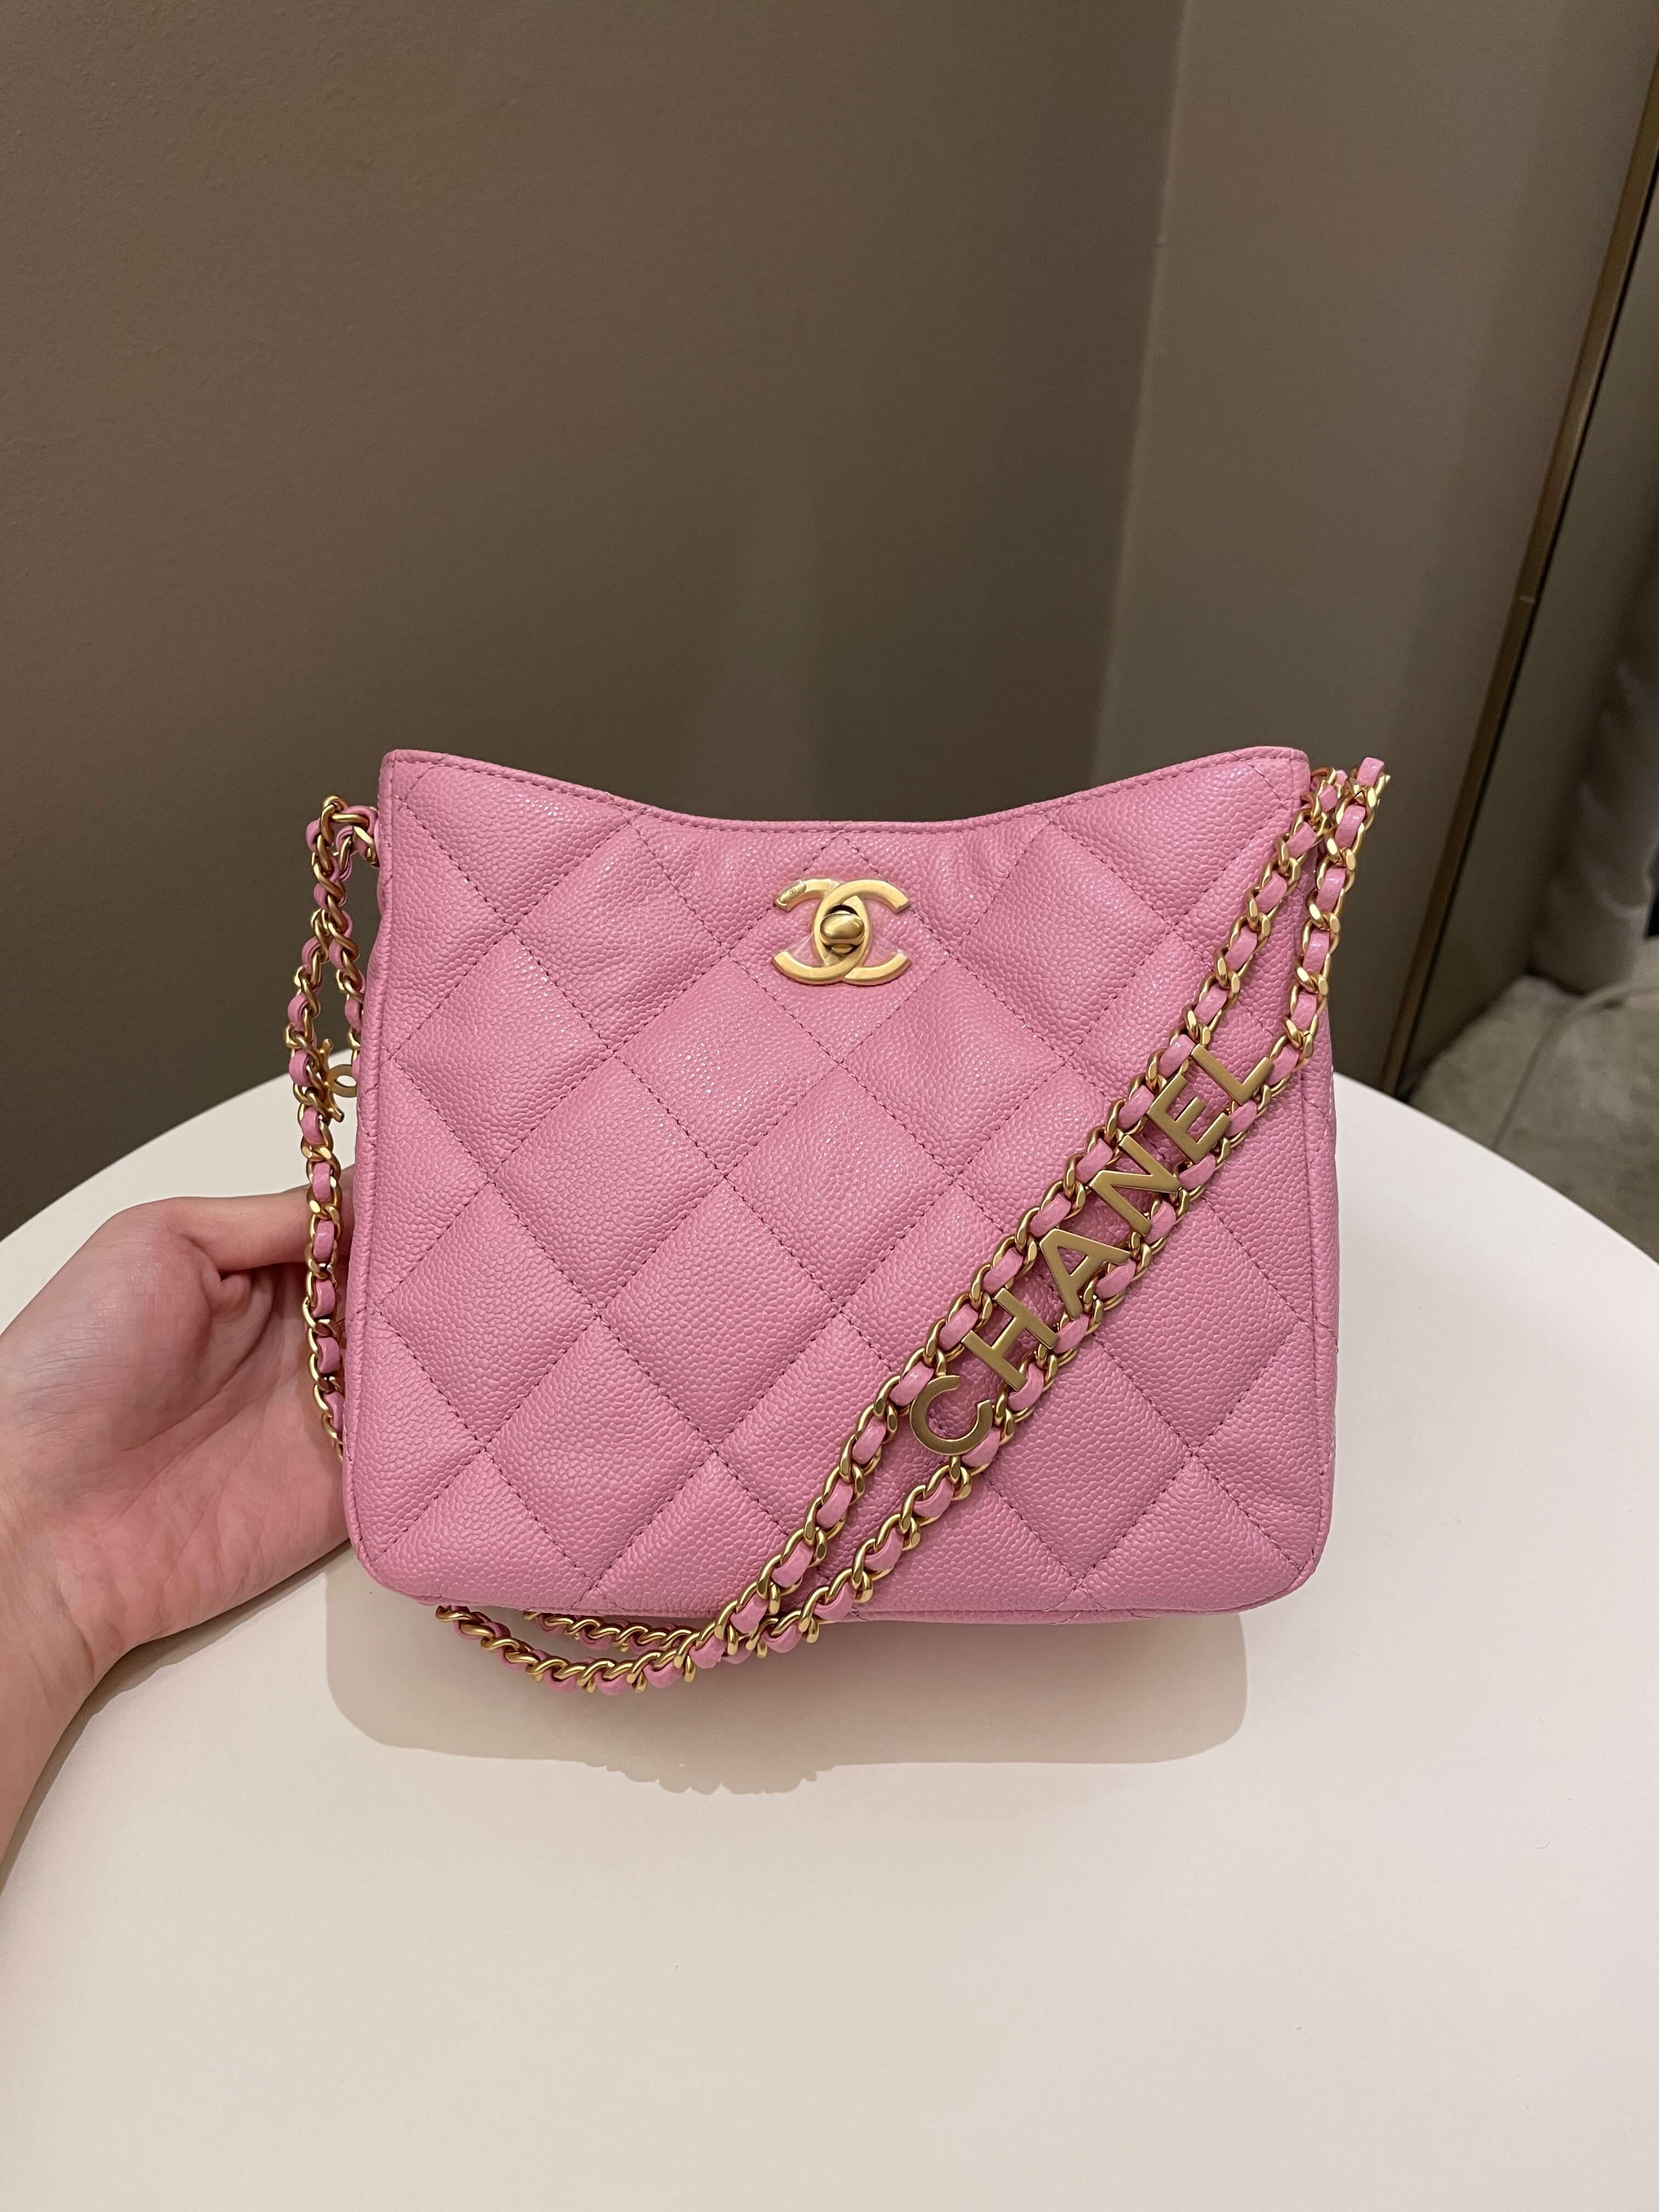 CHANEL Shoulder Bag Chocolate Bar Chain Lambskin Pink Gold From Japan